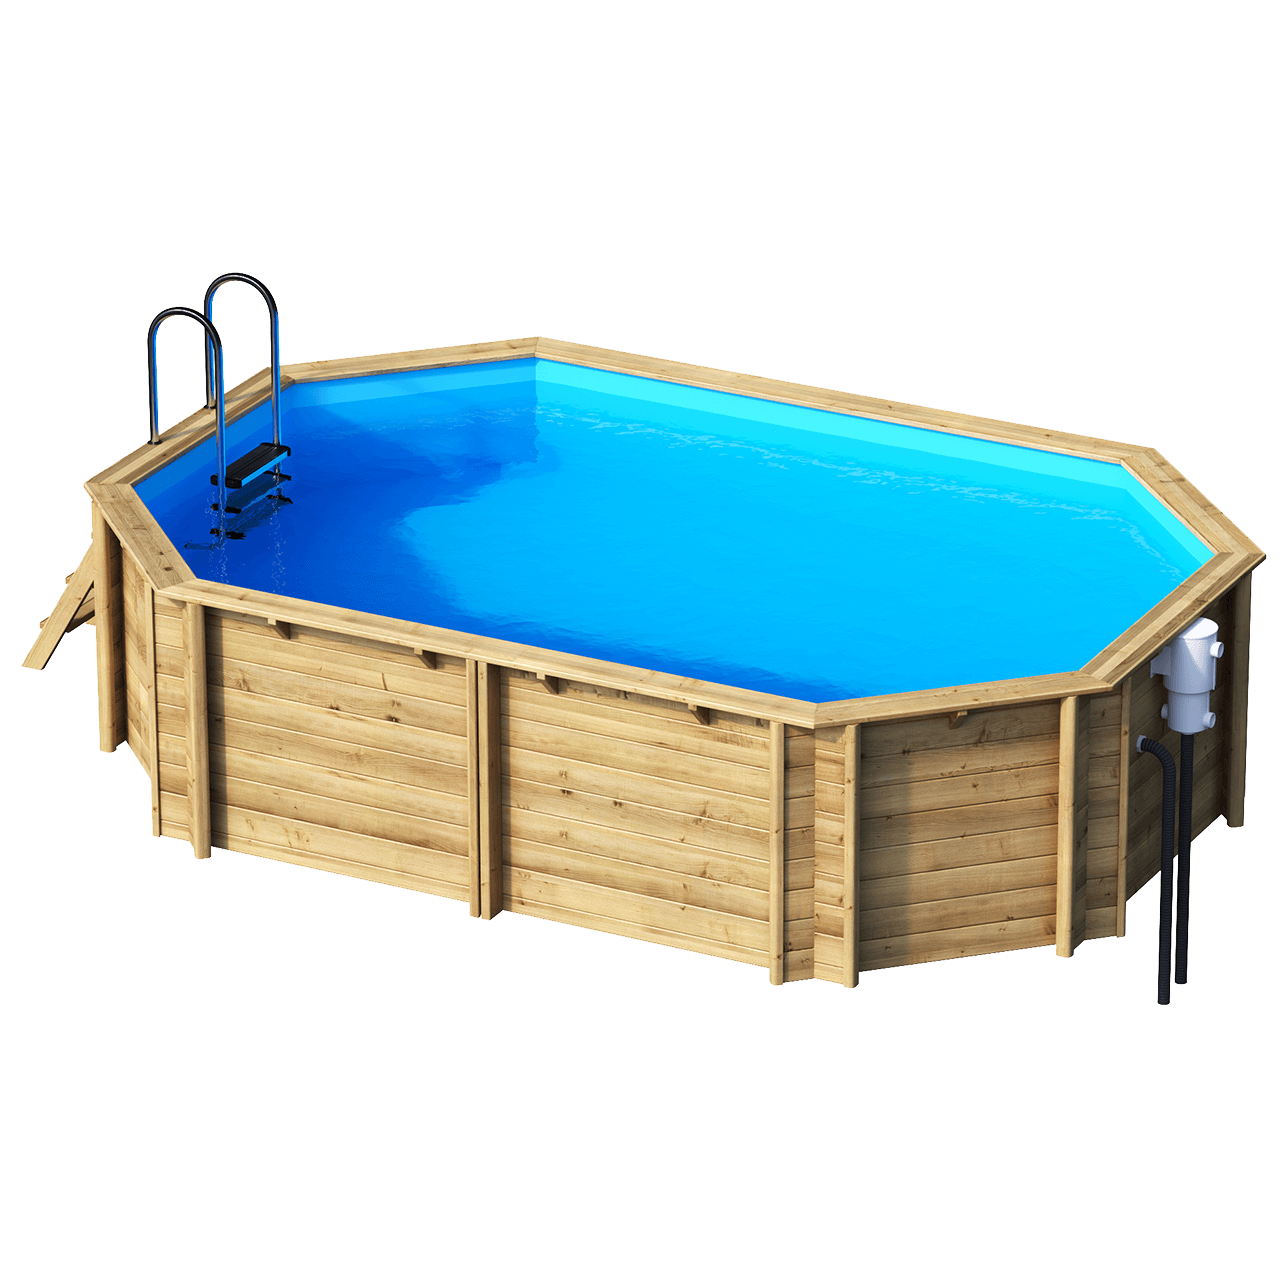 Tropic Octo 510 above-ground pool in wood look with blue foil on the inside